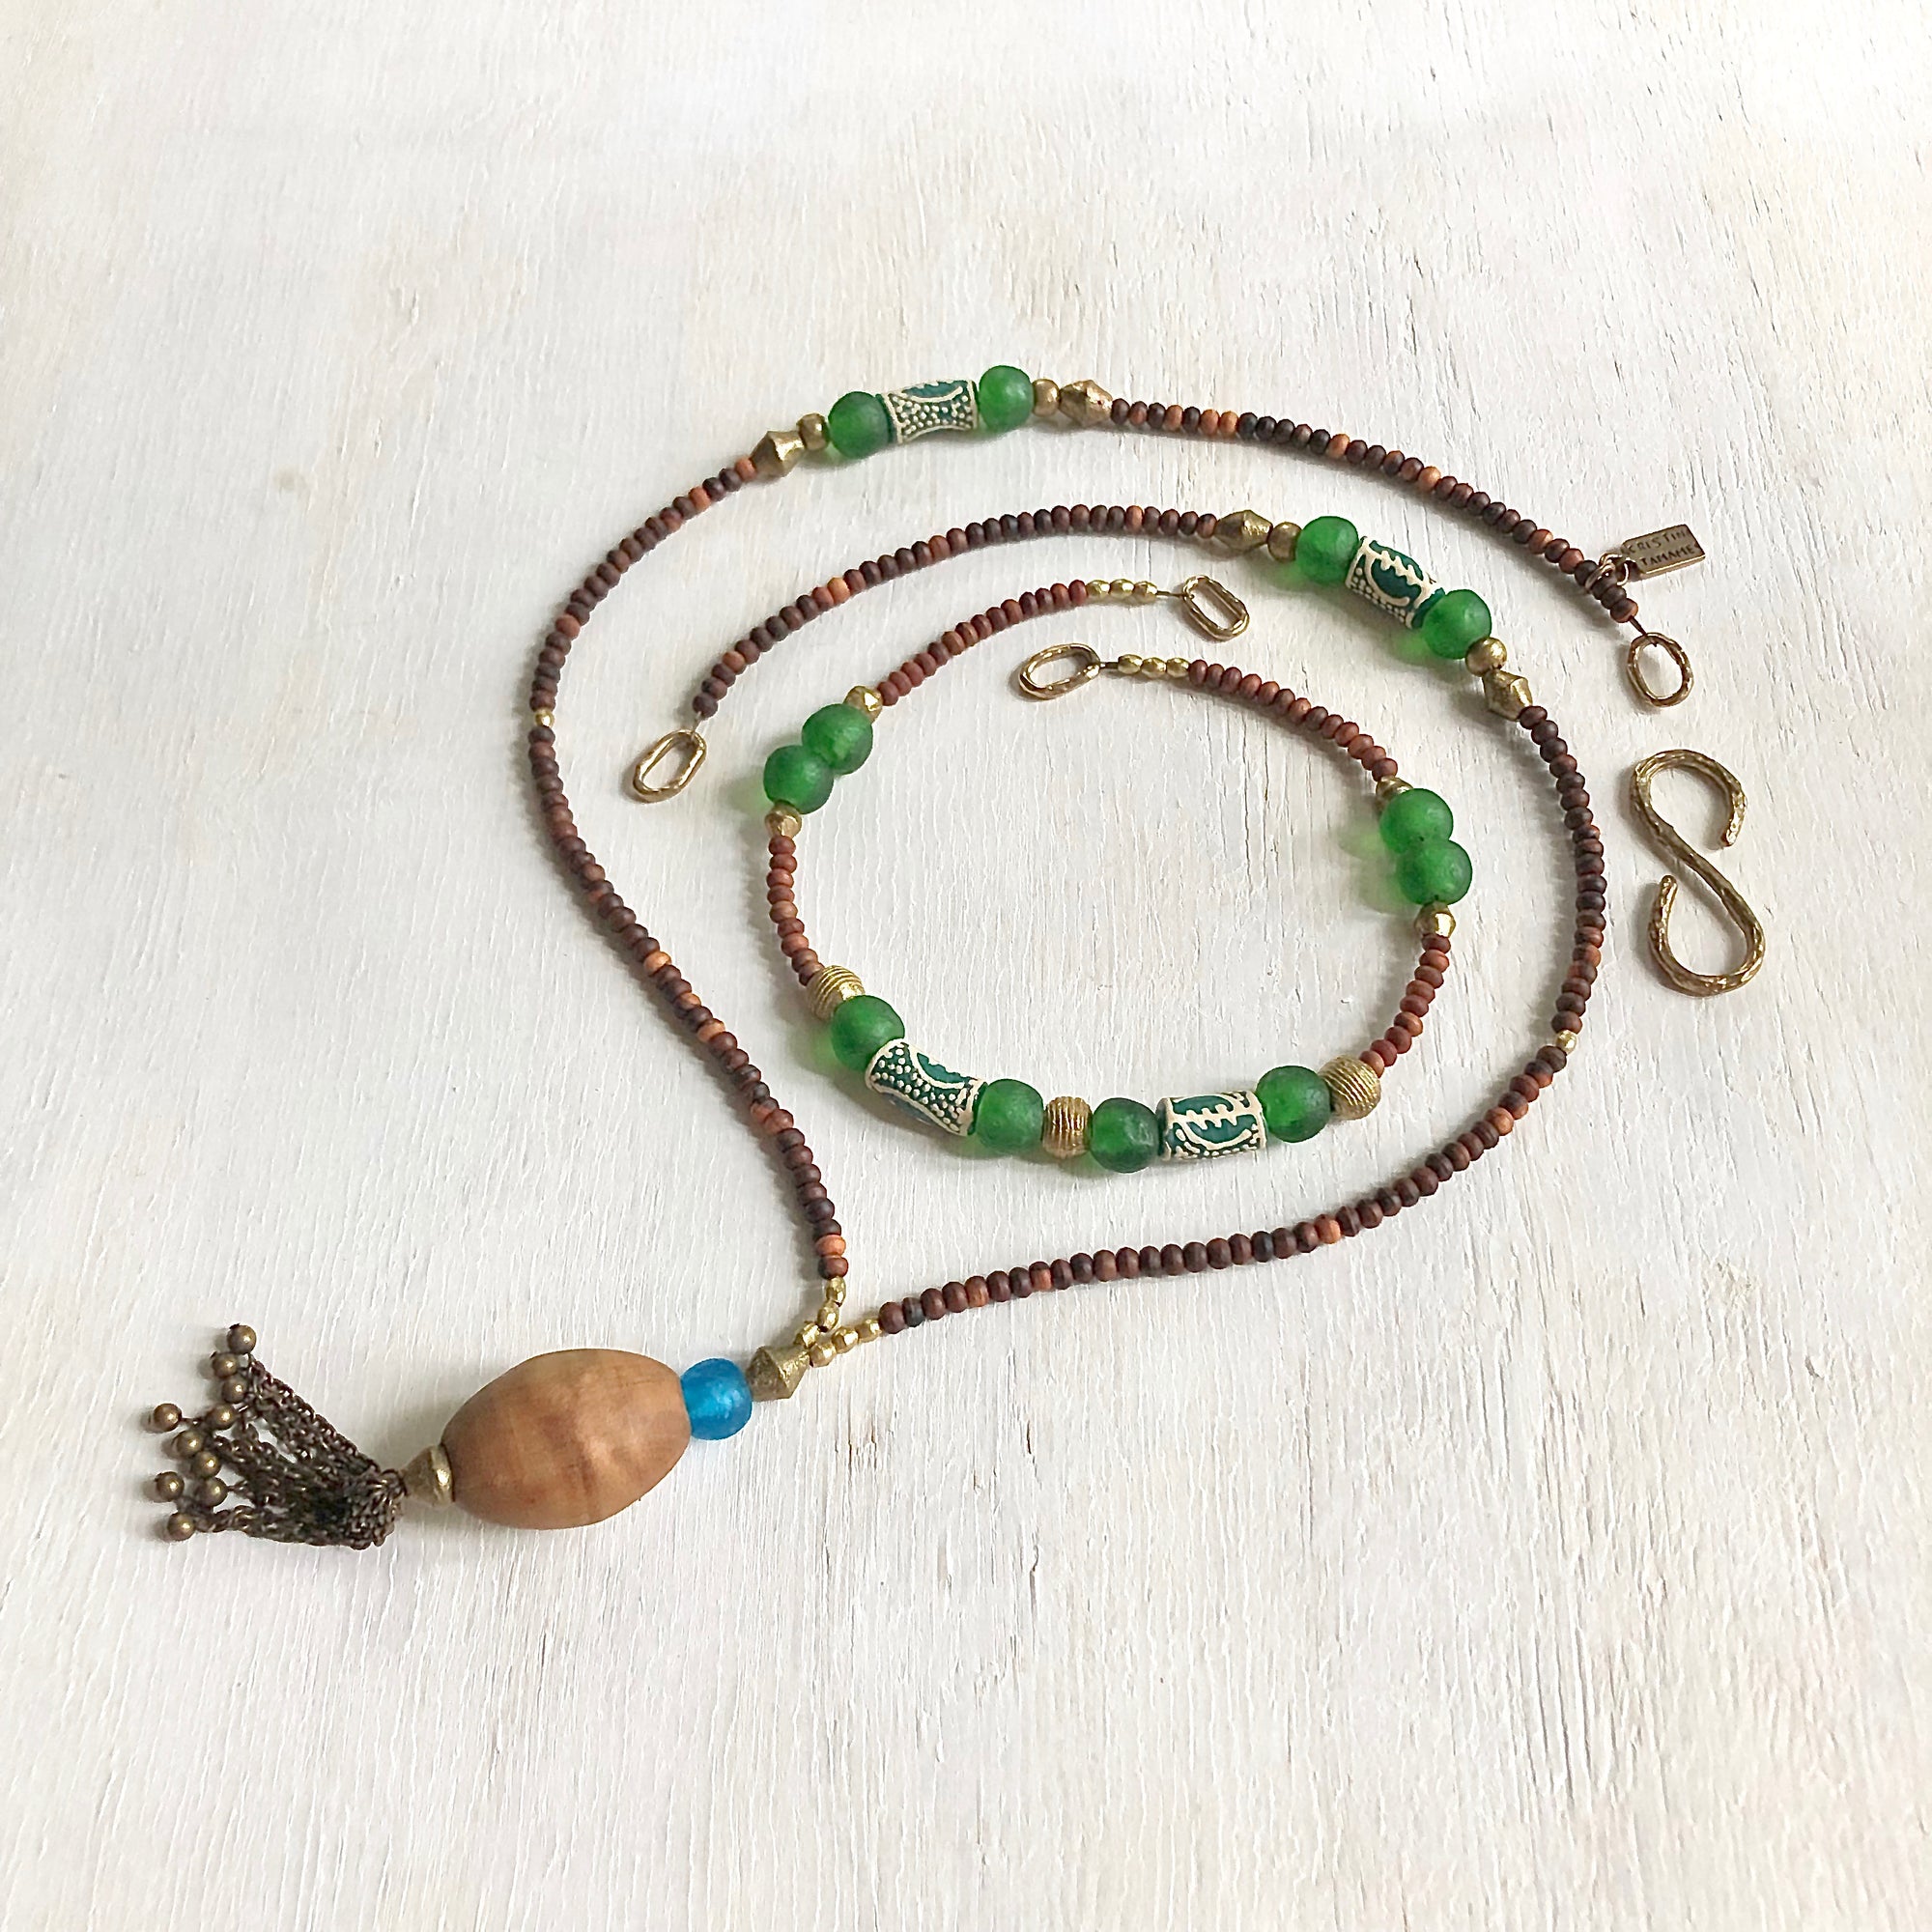 Wooden Bead Necklaces - Naturally Hand Dyed Beads – Poppy Jewelry Designs